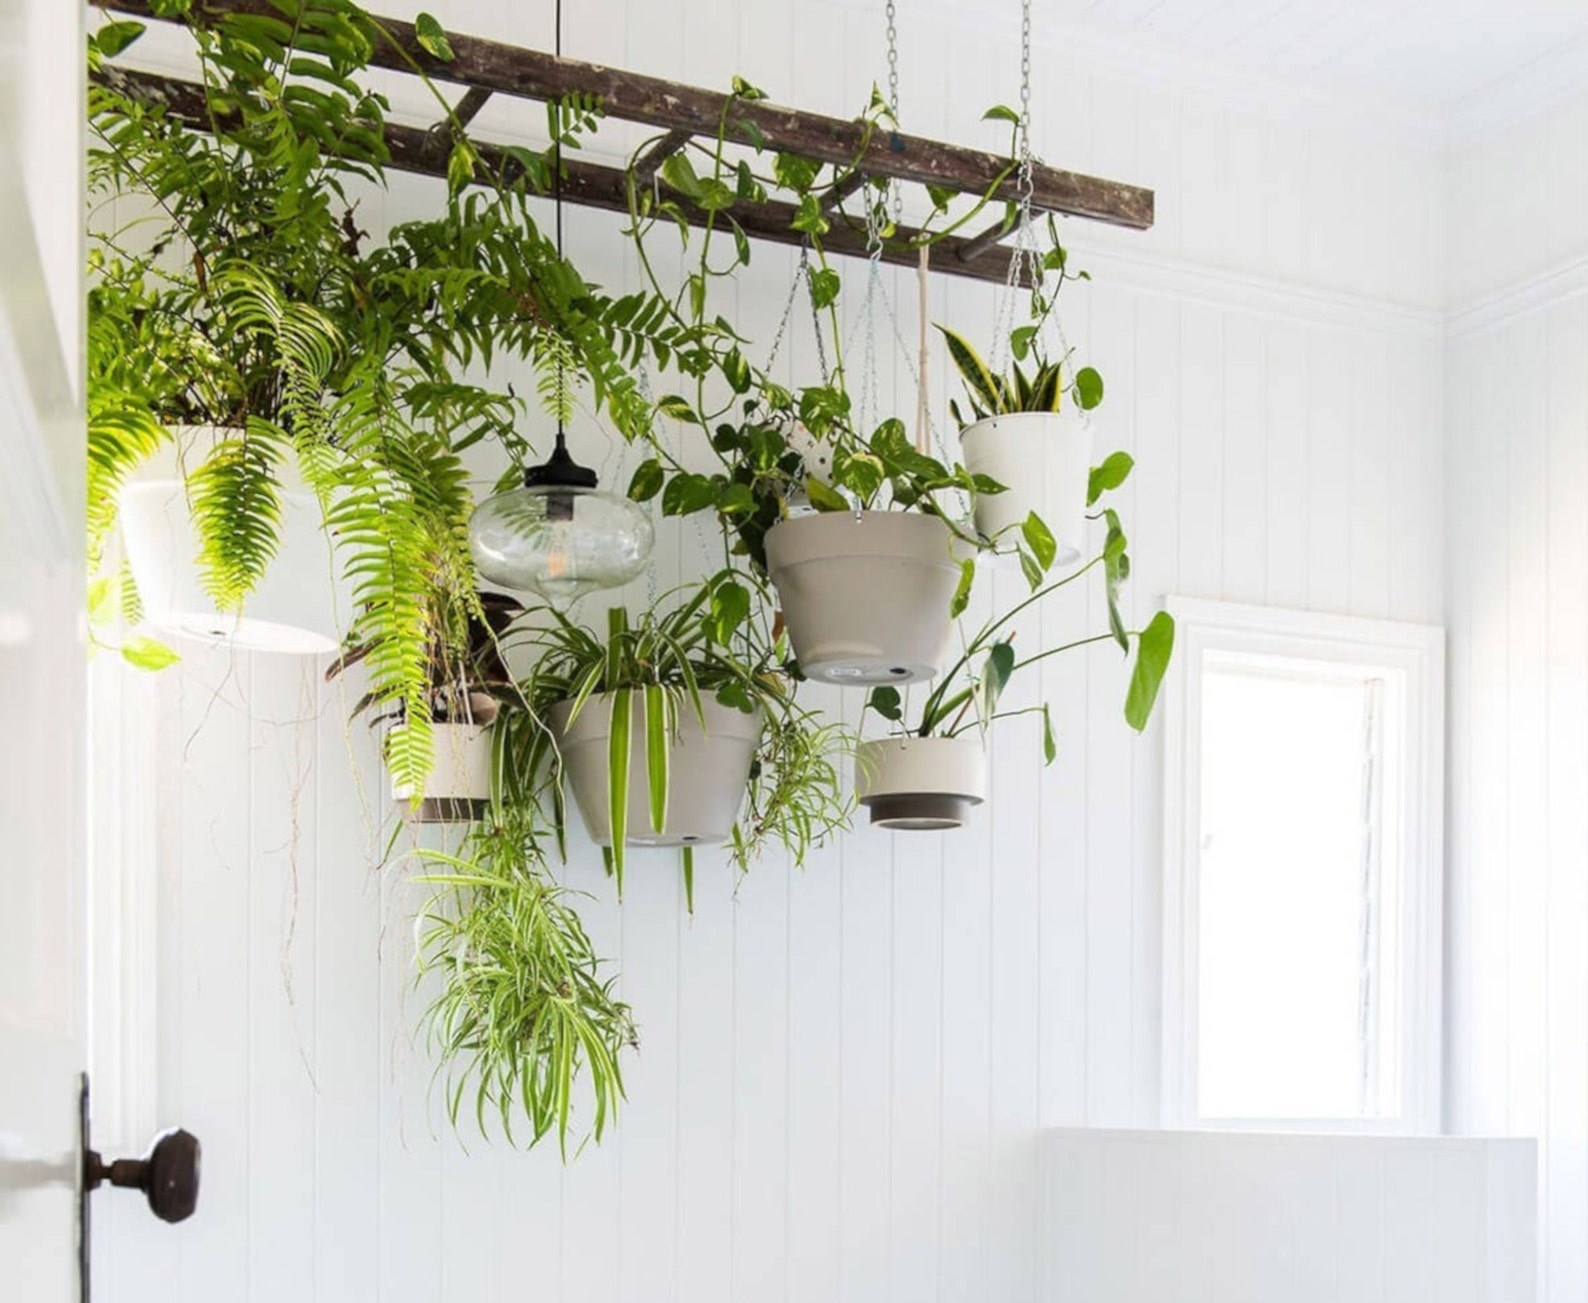 The plant rack mounted to a ceiling with various plants hanging from it